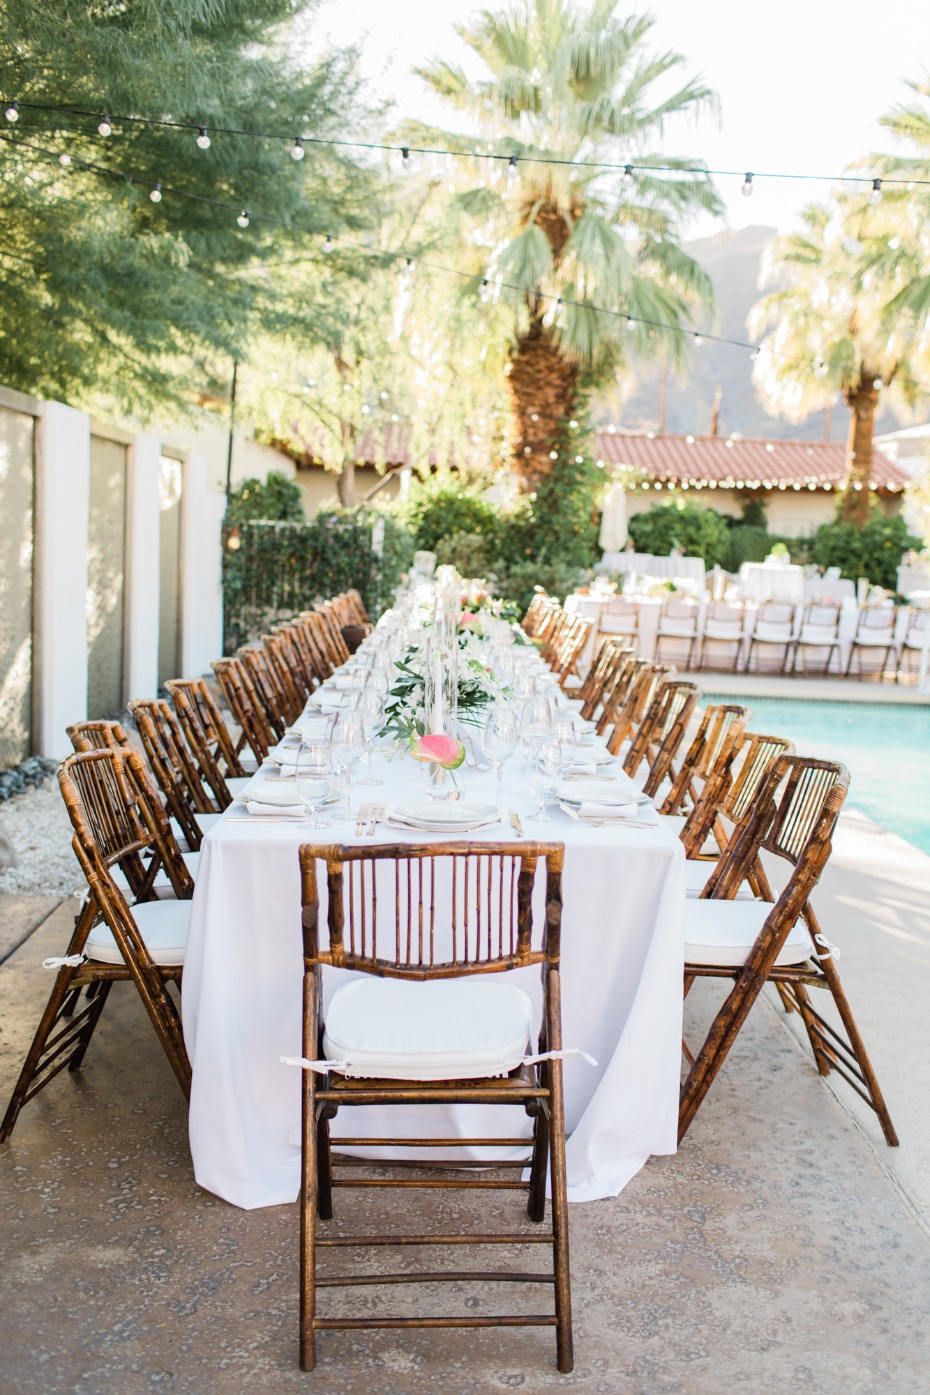 Family style poolside reception